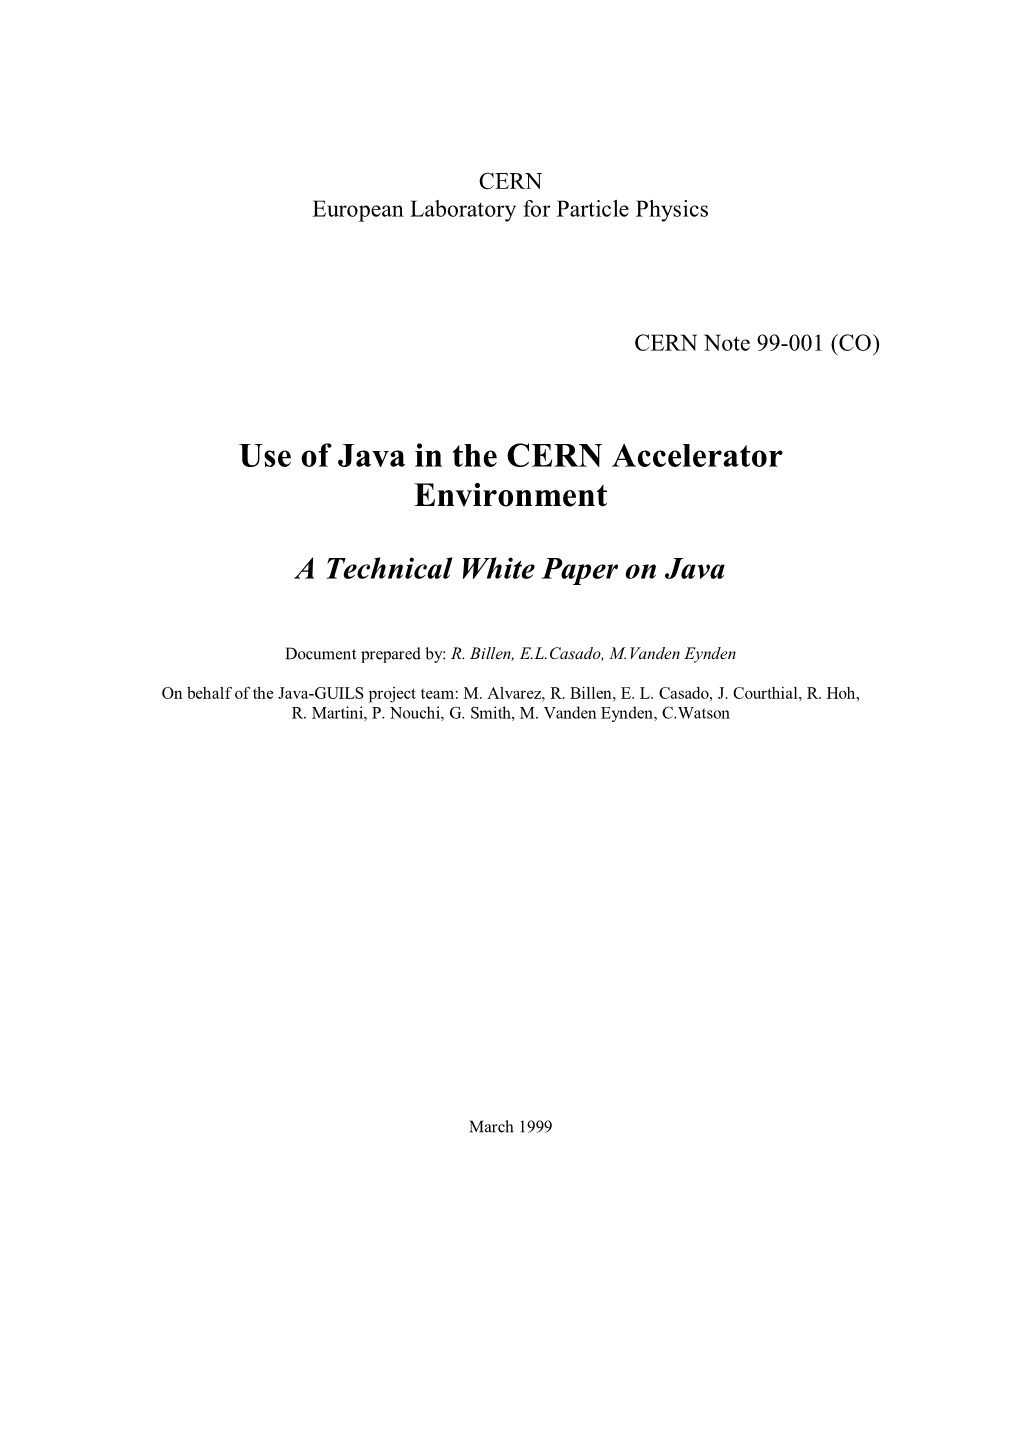 Use of Java in the CERN Accelerator Environment